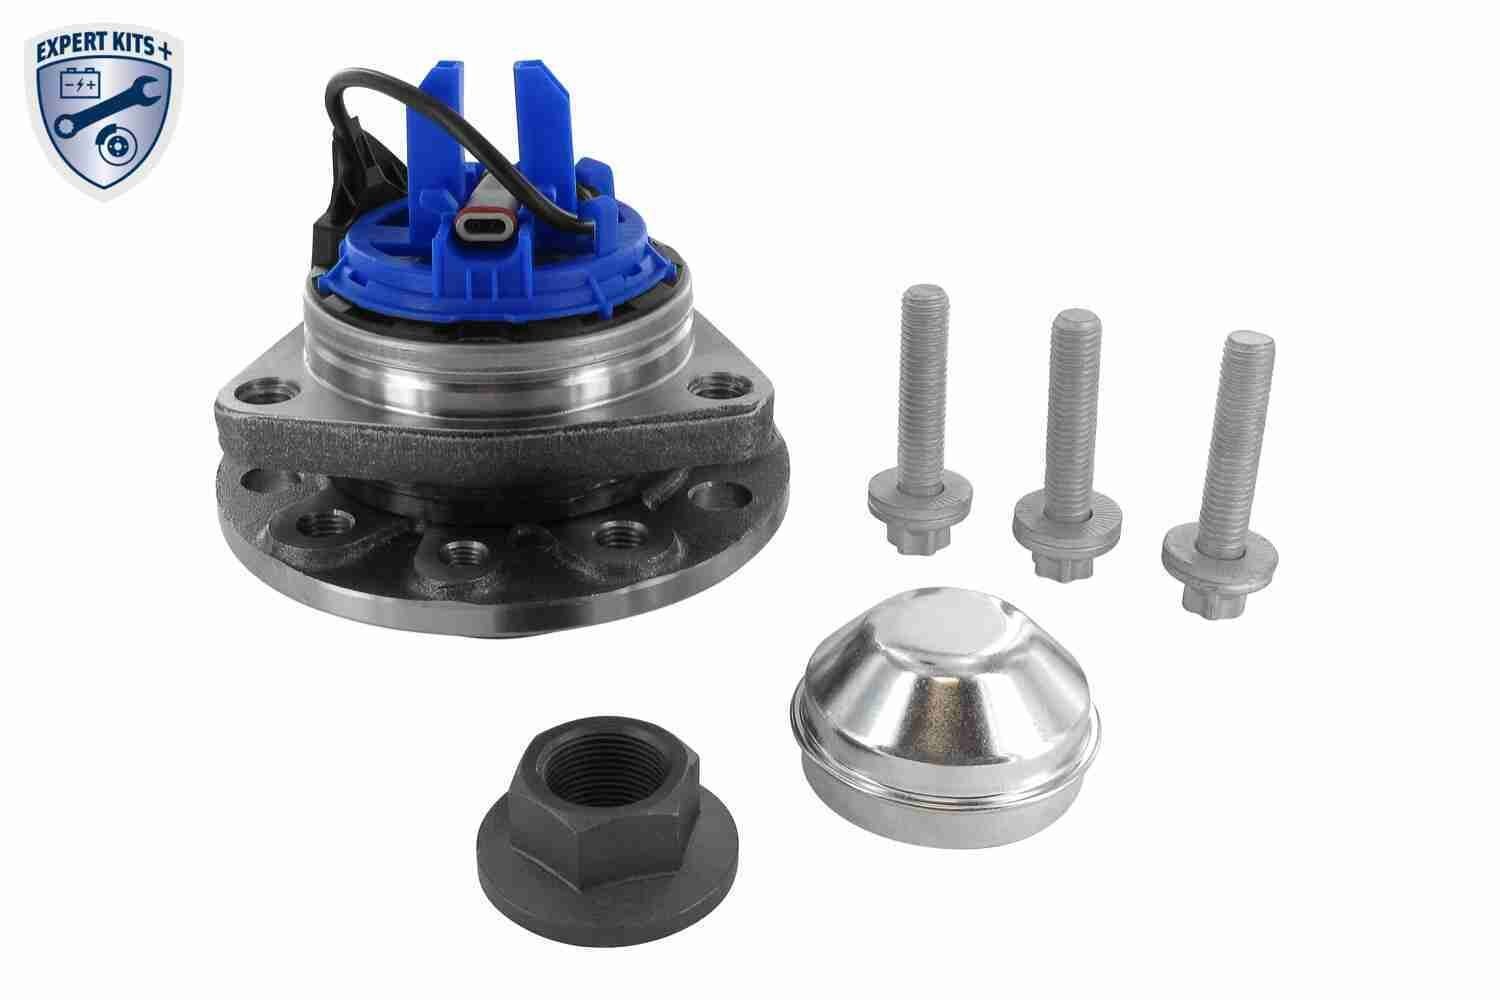 V40-0770 VAICO Wheel bearings SAAB Front Axle, with attachment material, EXPERT KITS +, with integrated magnetic sensor ring